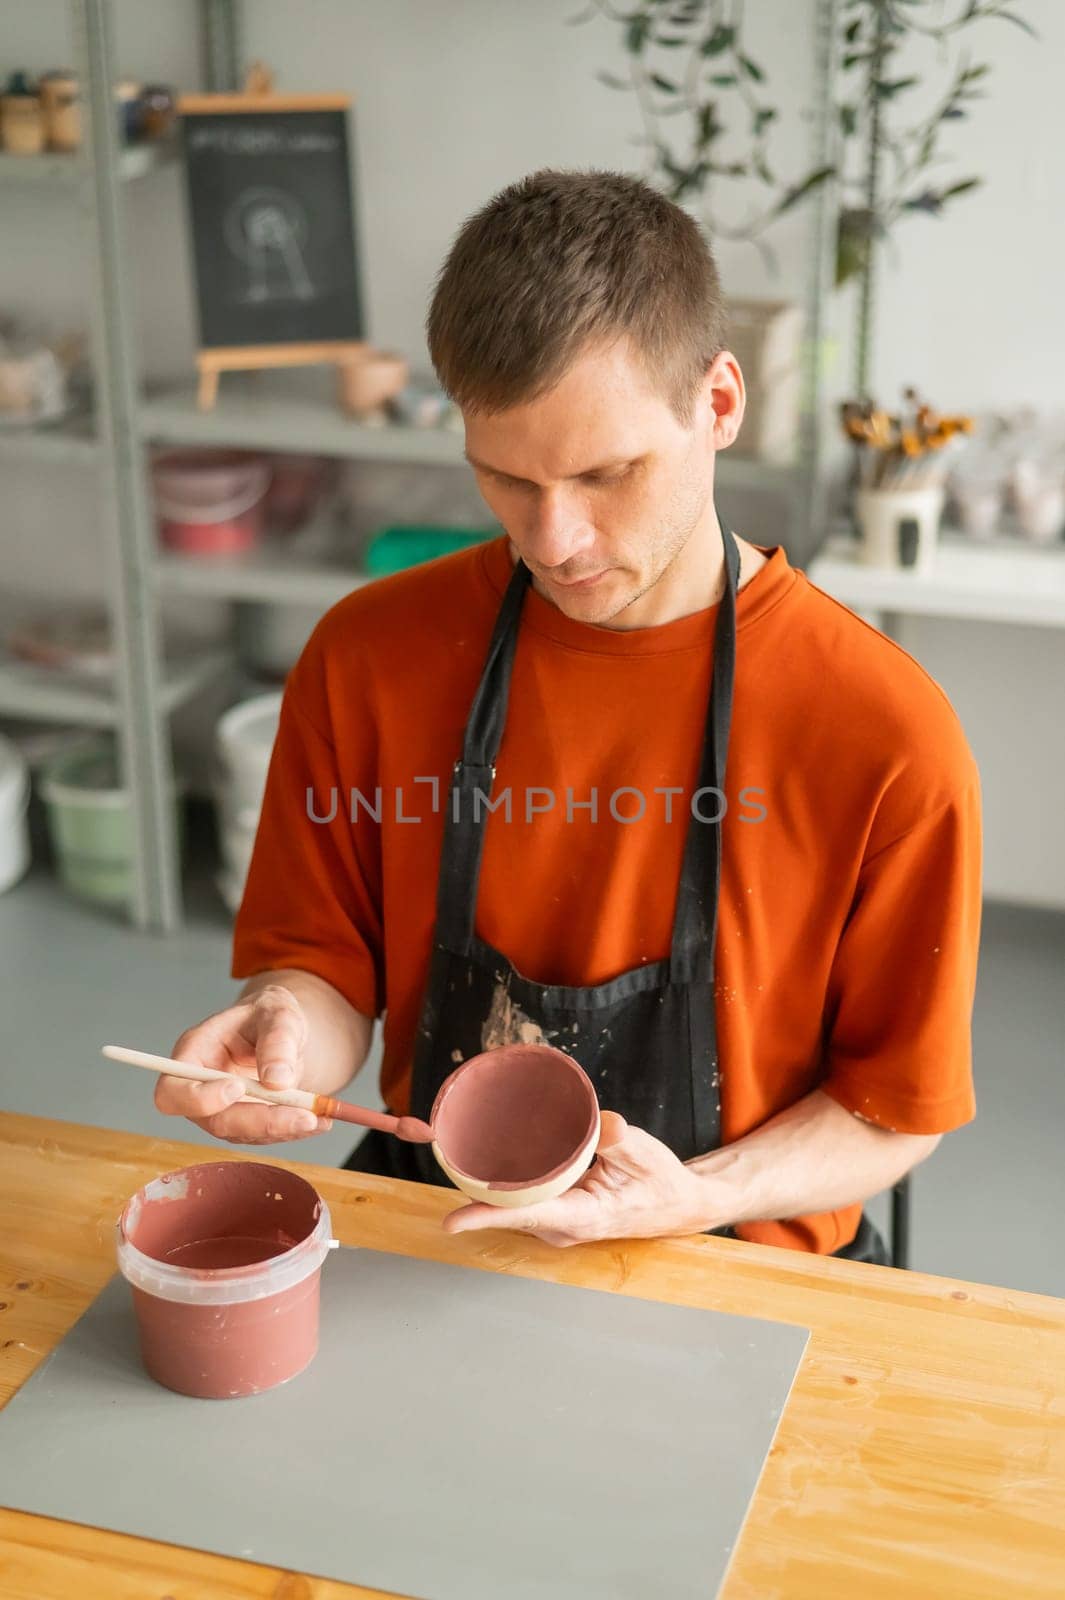 Potter paints ceramic dishes with a brush. Vertical photo. by mrwed54